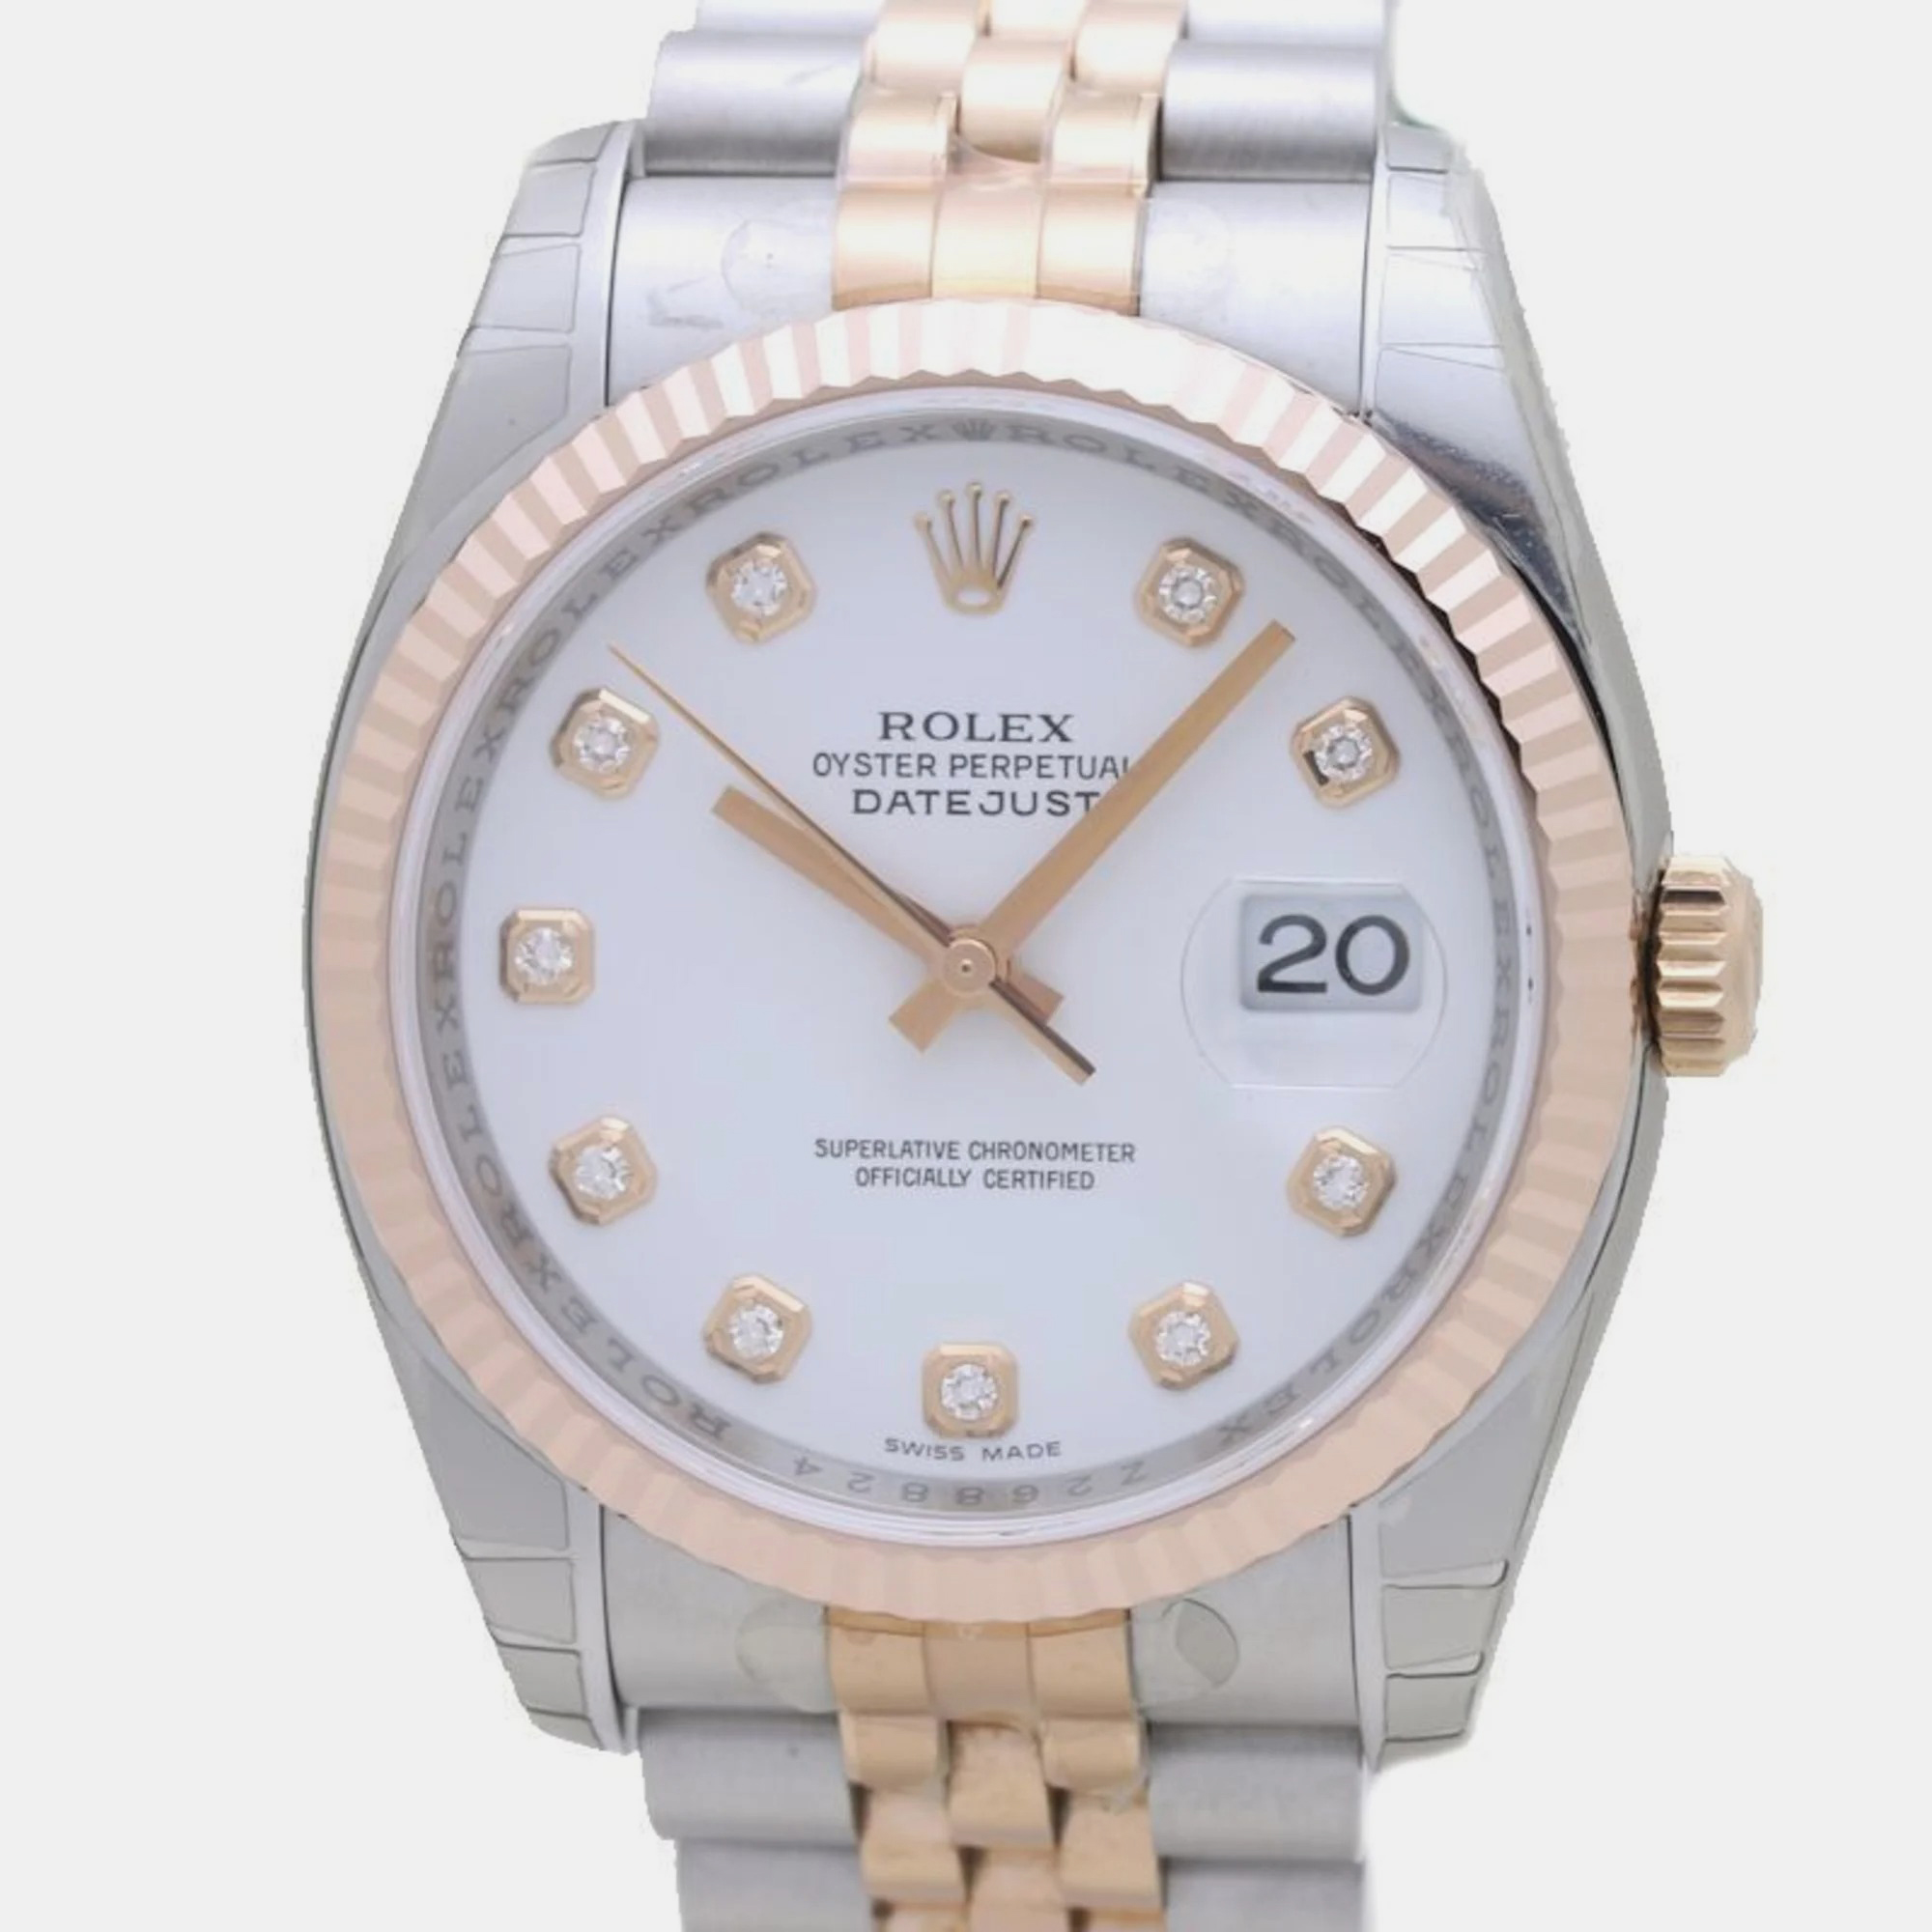 Pre-owned Rolex White 18k Rose Gold Stainless Steel Diamond Datejust 116231 Automatic Men's Wristwatch 36 Mm